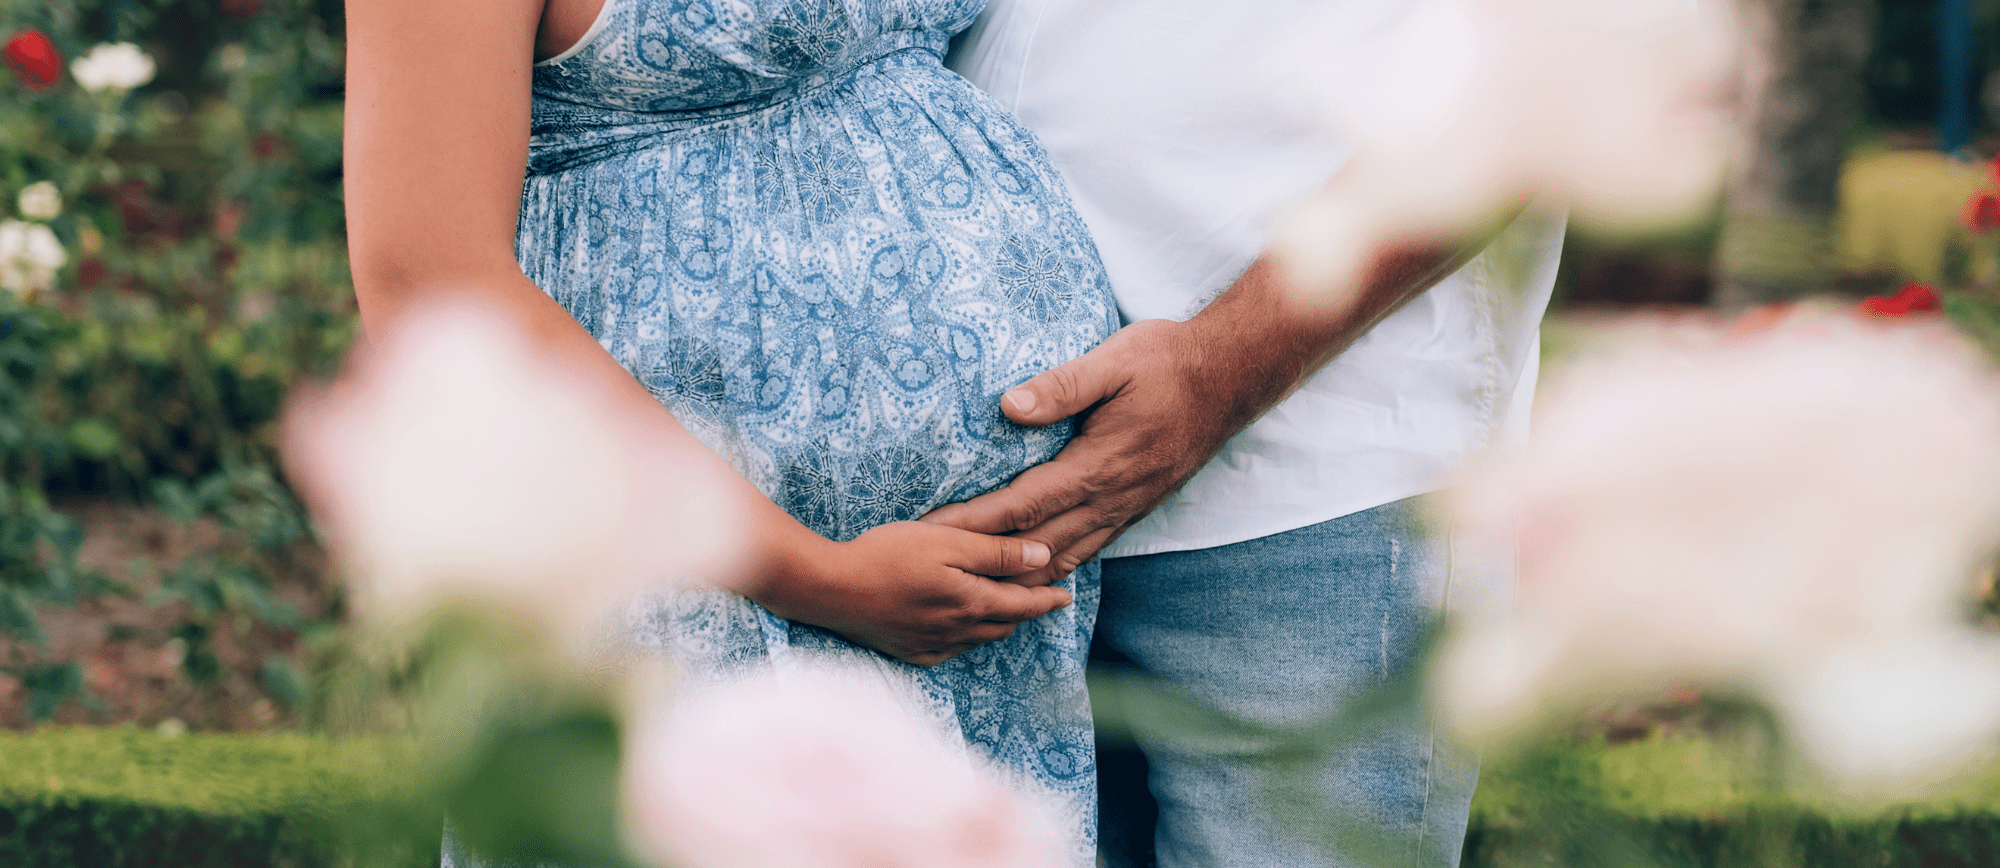 Can I get a mortgage when pregnant?